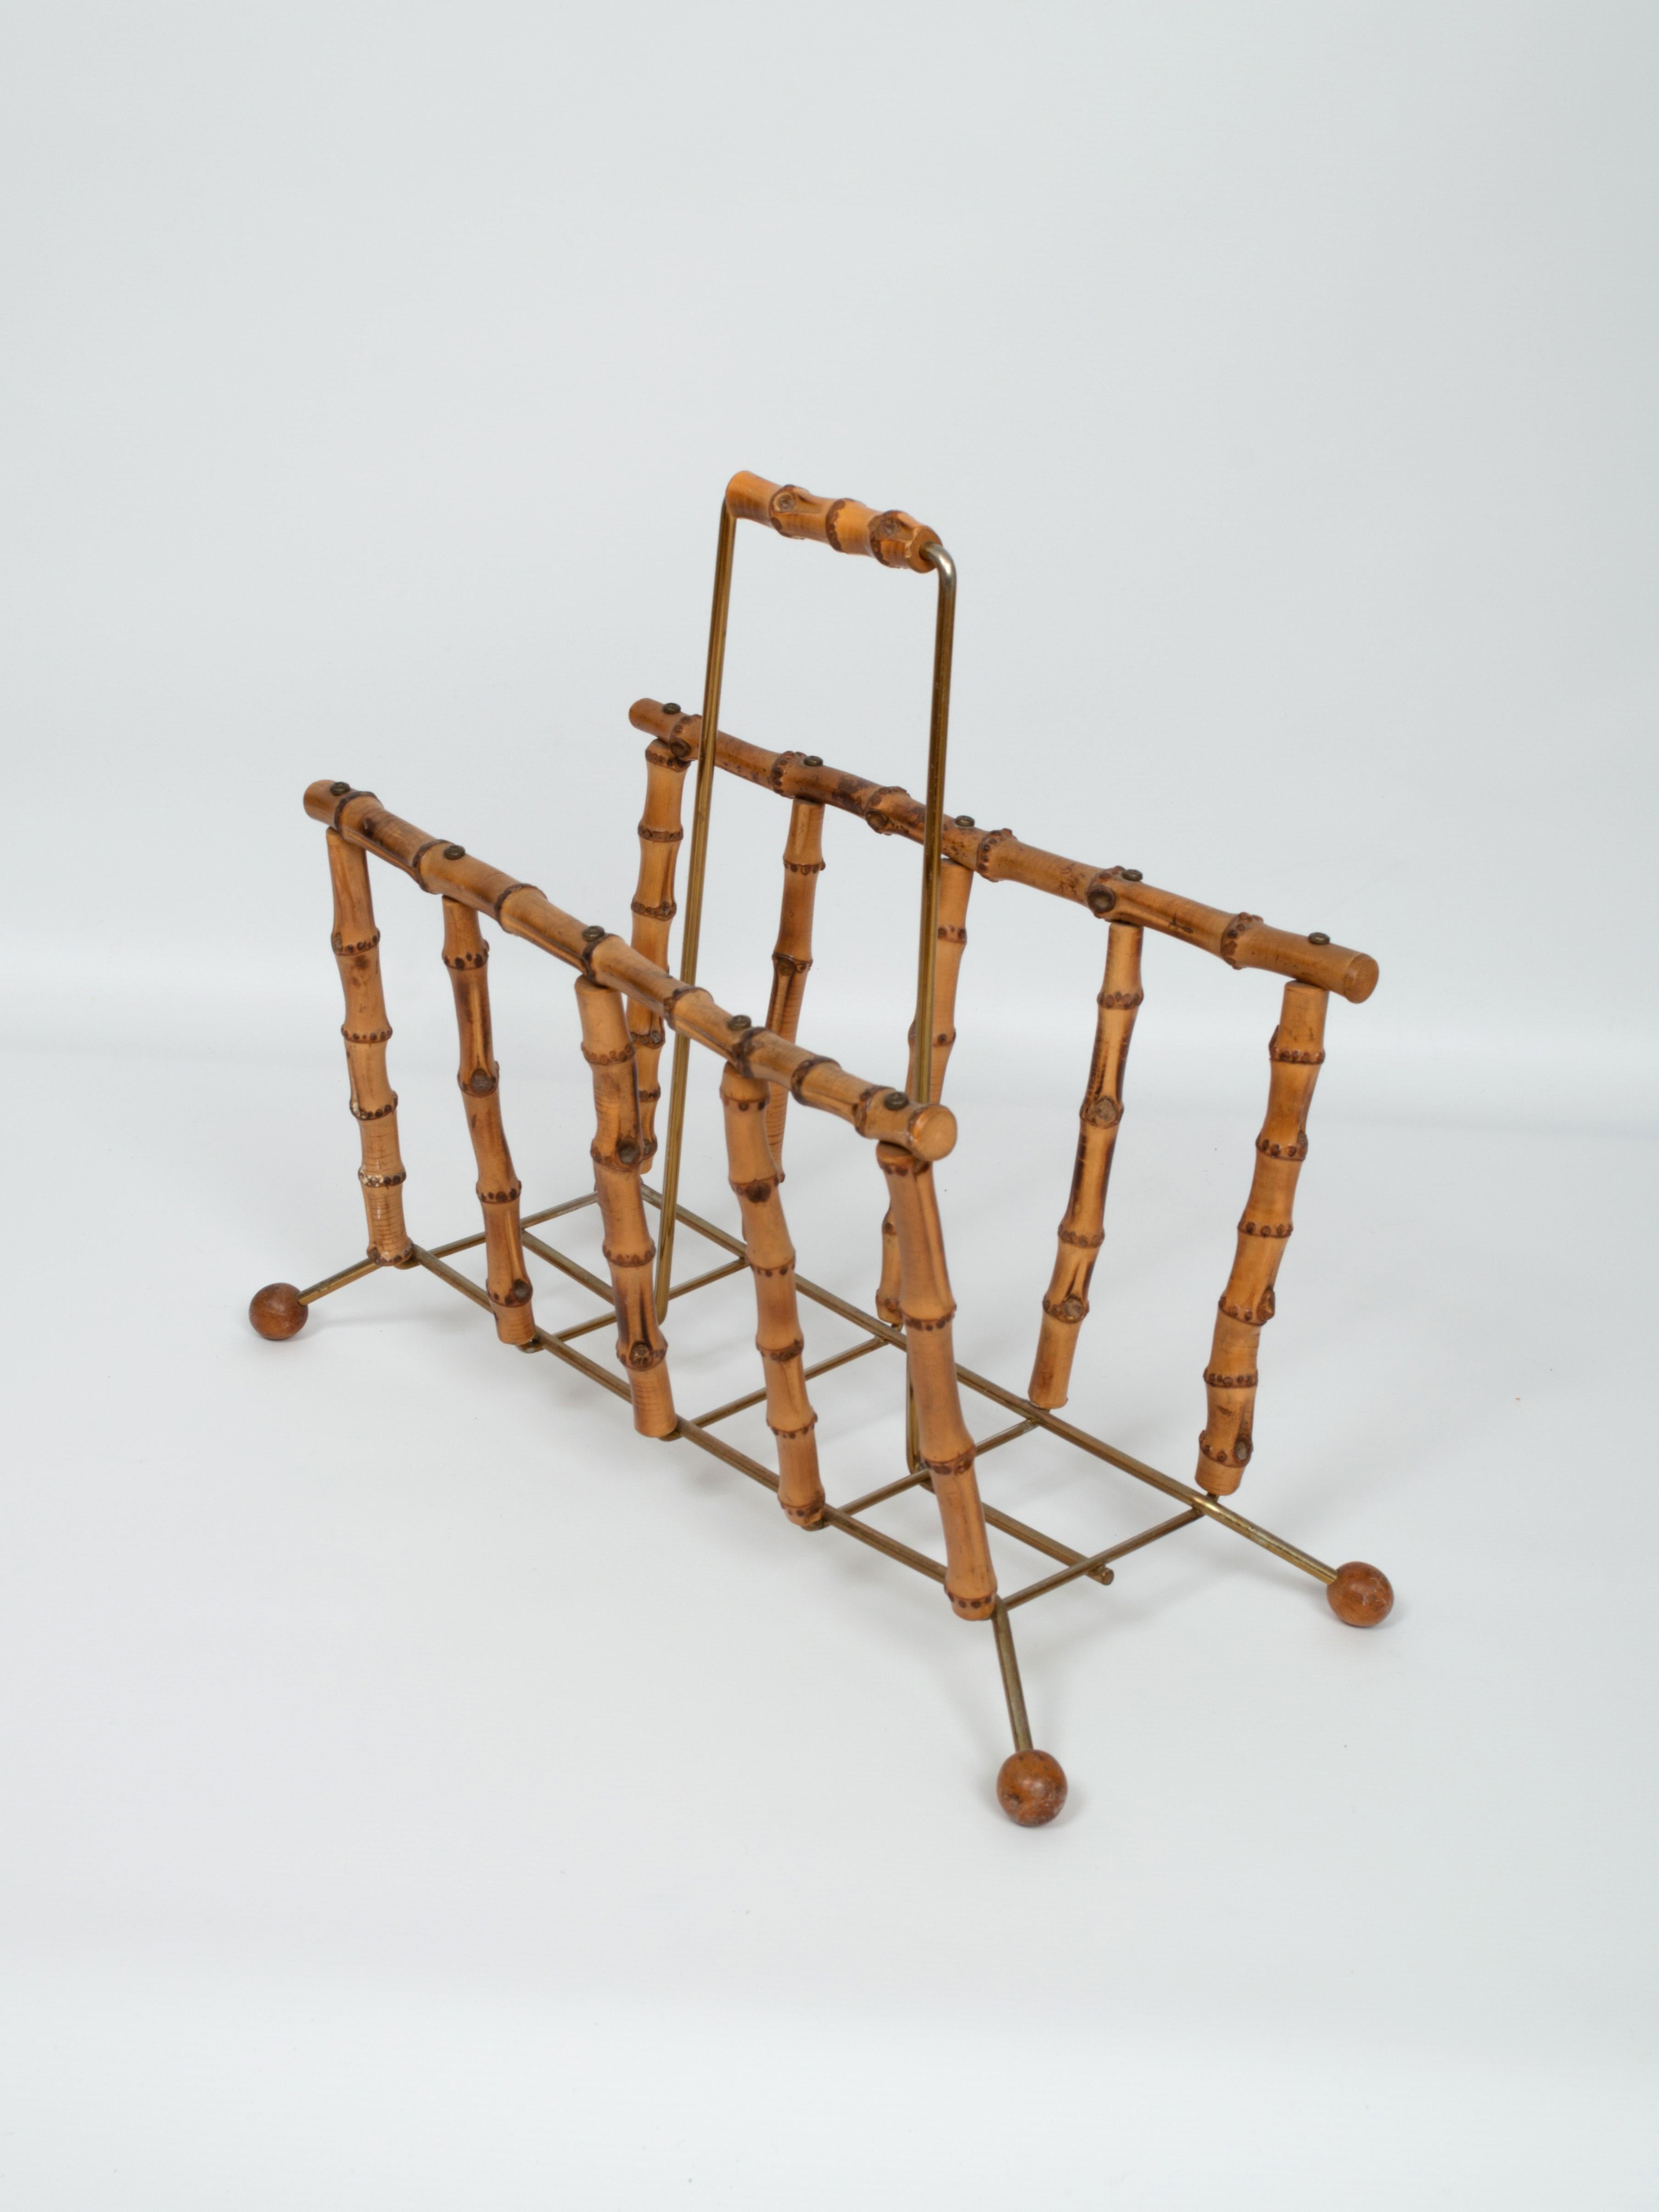 Mid-Century Modern bamboo and brass magazine holder rack, France, circa 1960.
In good vintage condition with expected signs of age.